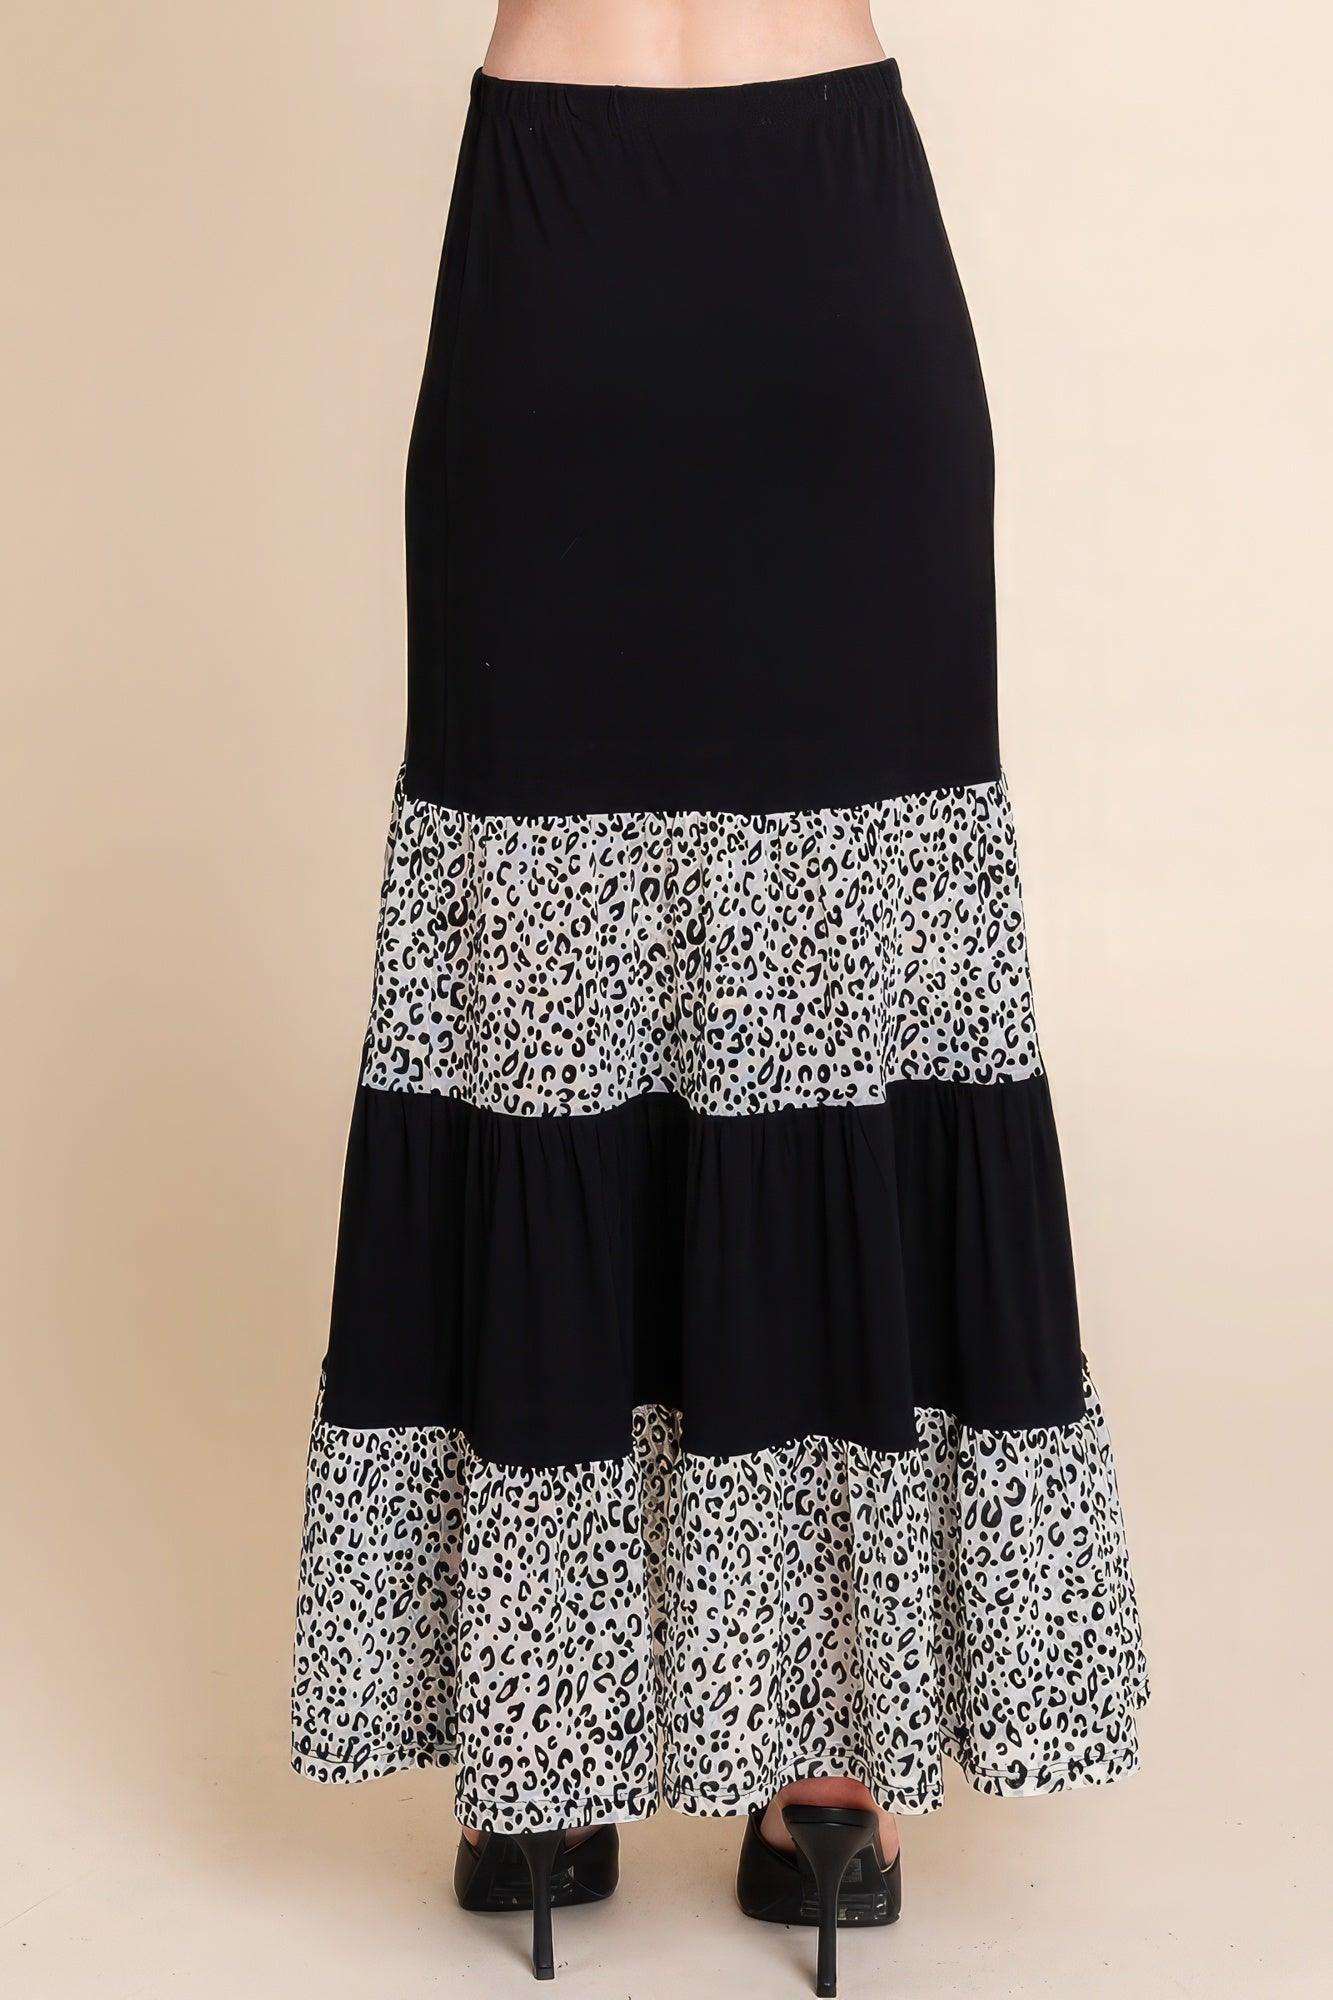 Long Tiered Contrast Fashion Skirt With Velvet Animal Print Mesh - AMIClubwear